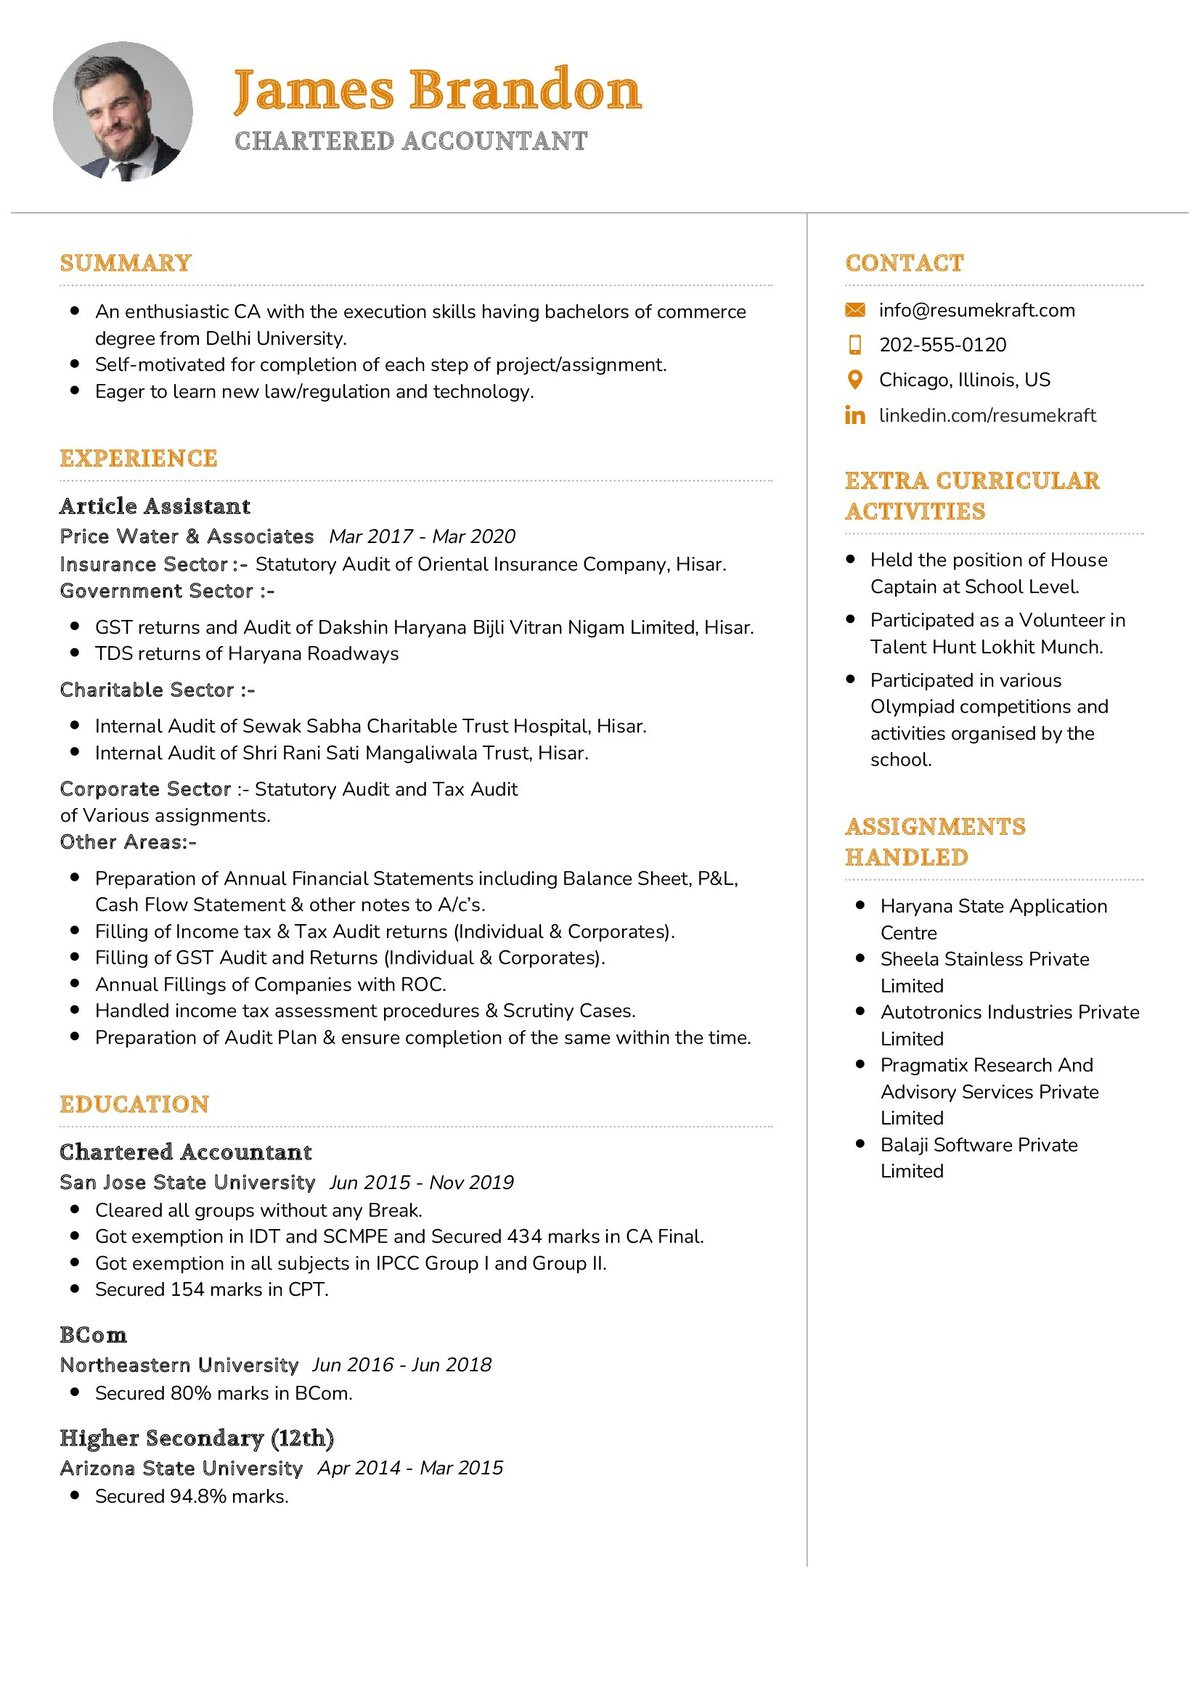 Sample Of A Professional Accountant Resume Chartered Accountant Resume Sample 2022 Writing Tips – Resumekraft